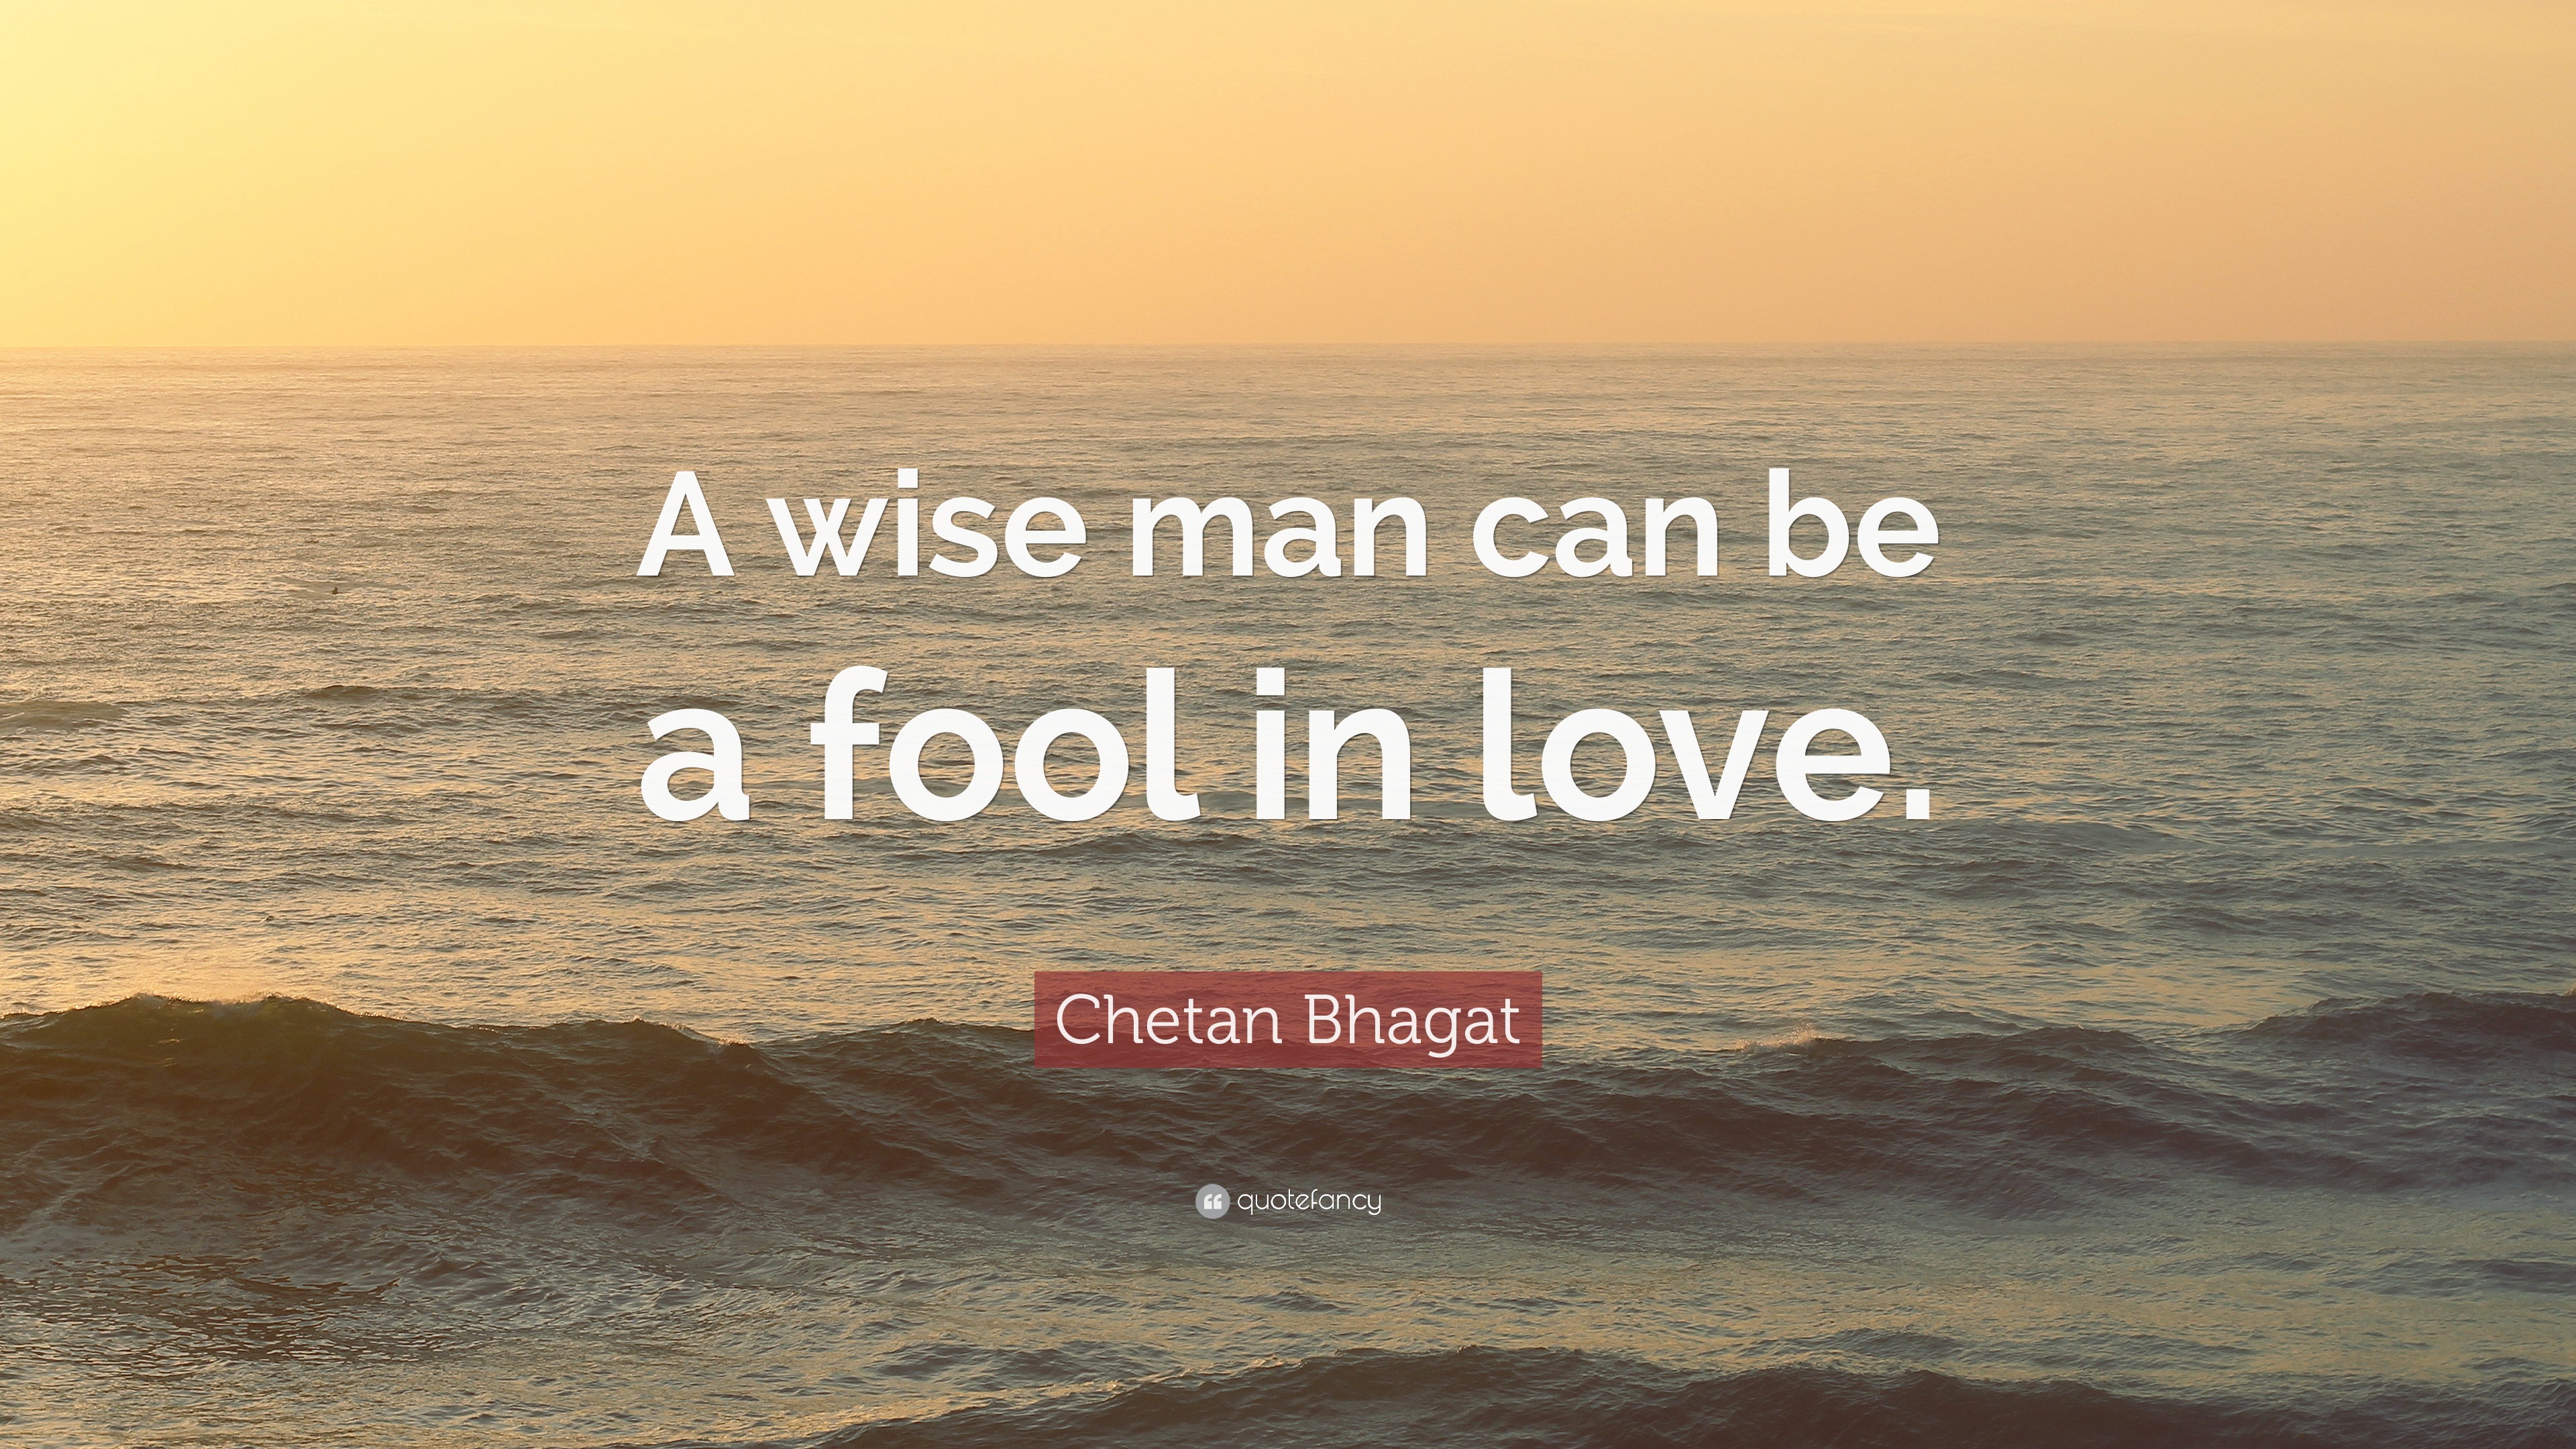 a wise man can be a fool in love. chetan bhagat